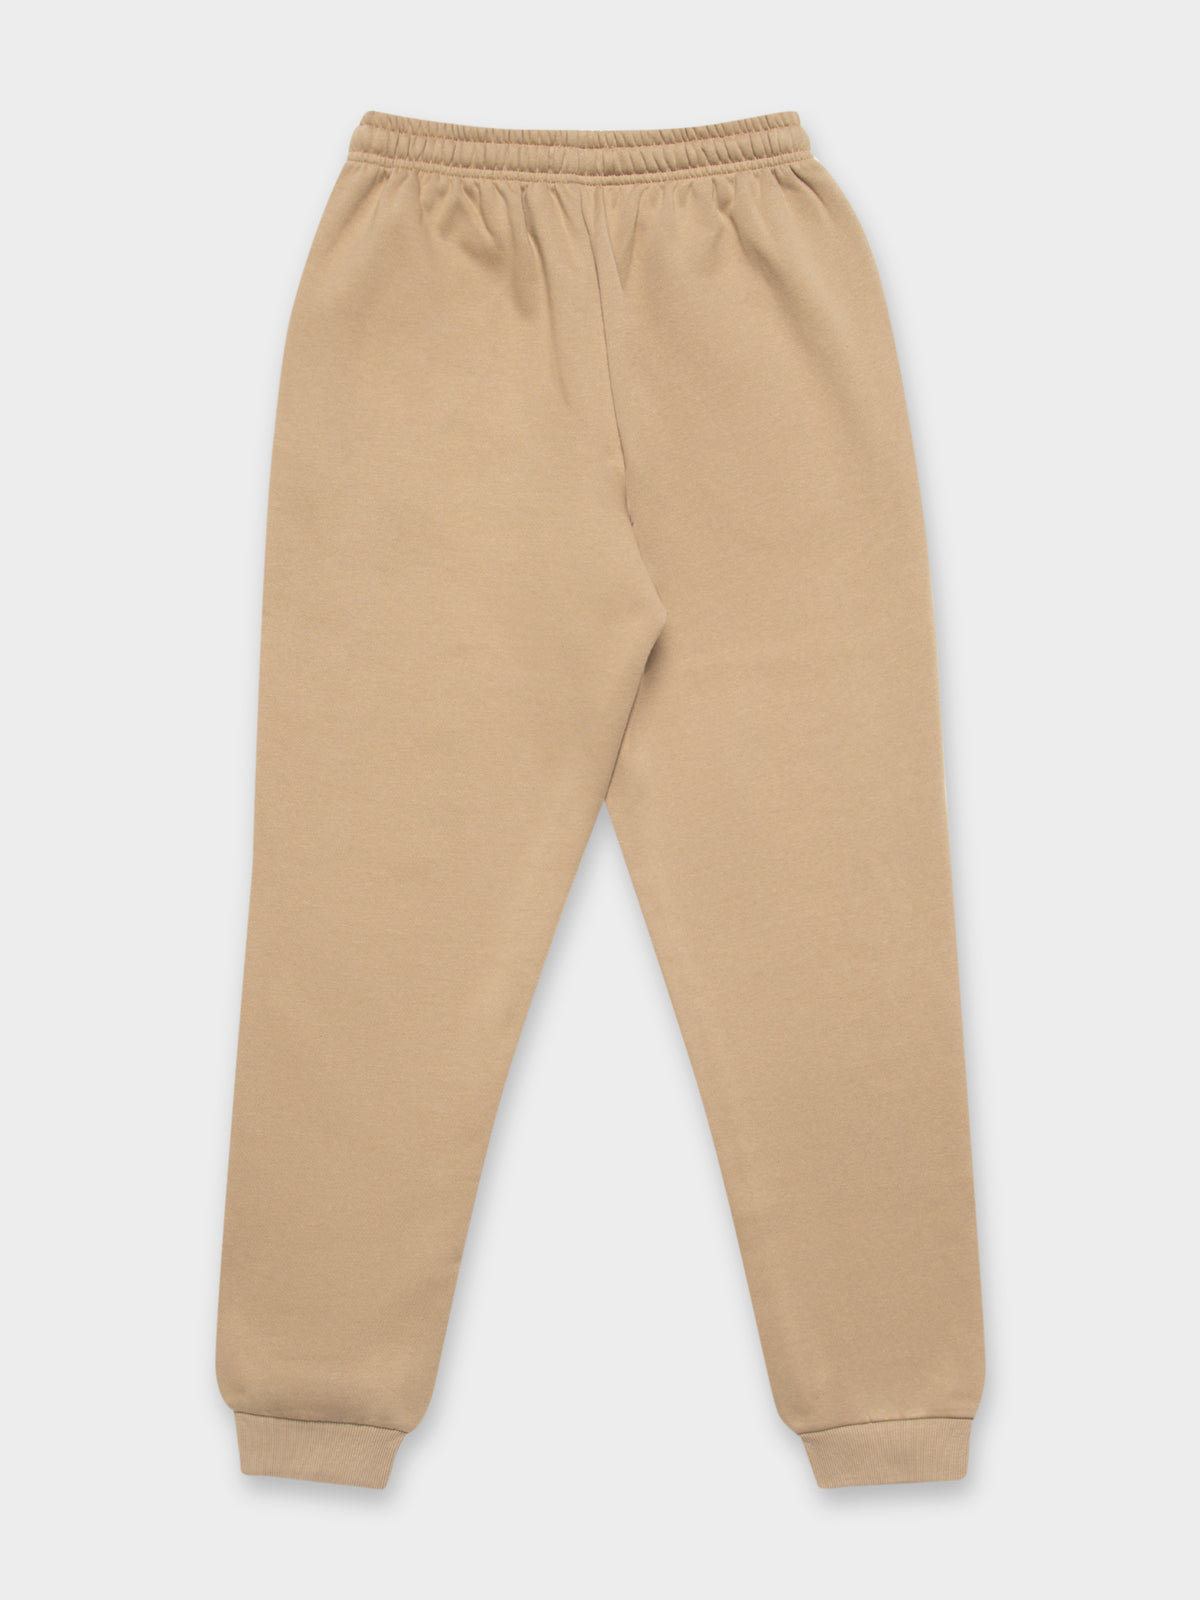 Carter Classic Track Pants in Sepia